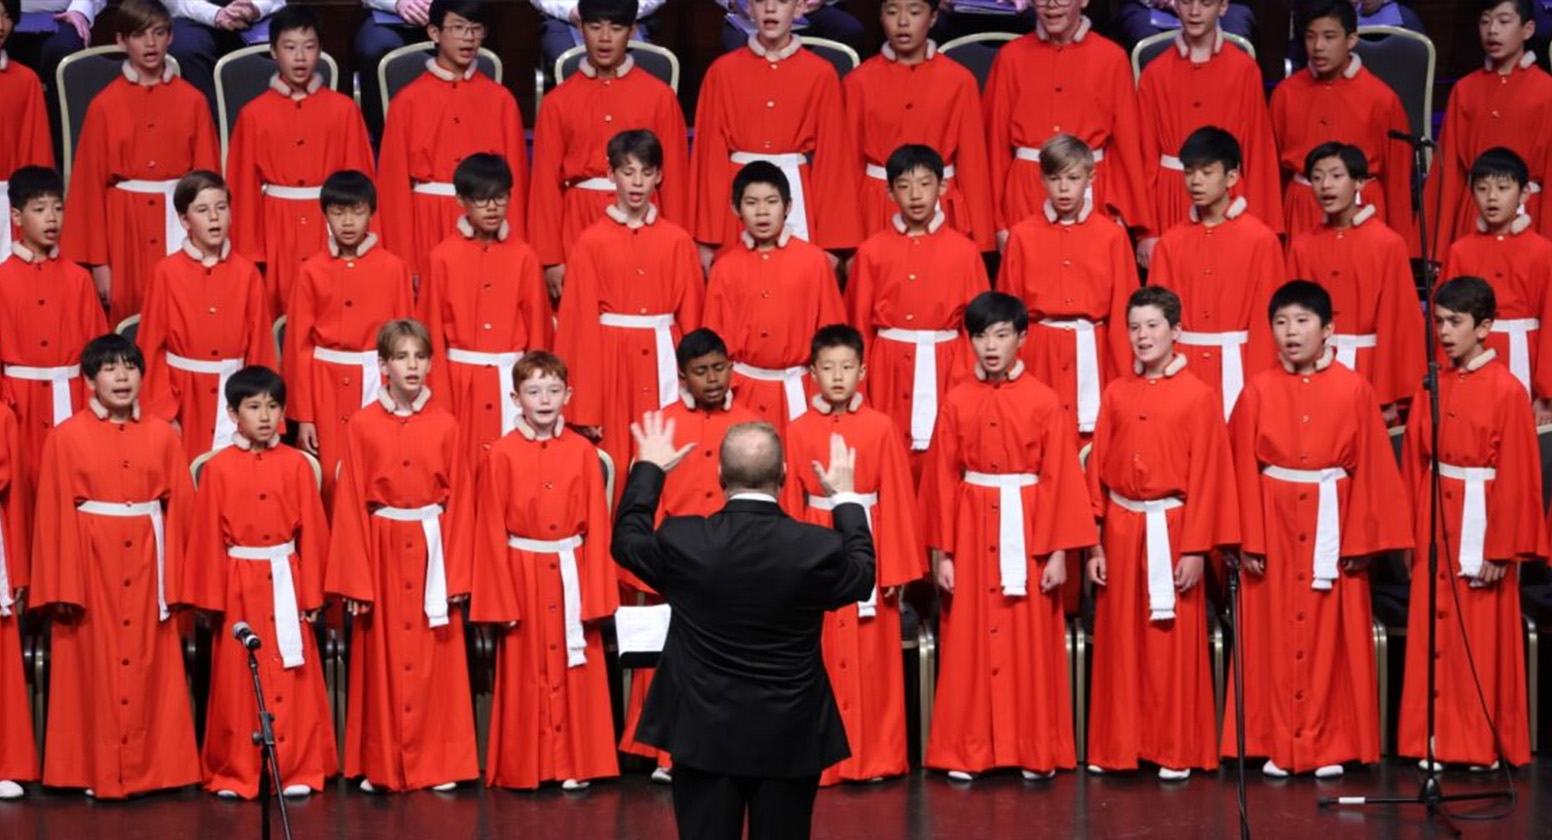 Boys in red robes with white sash belts stand in tiers singing, in front of a conductor